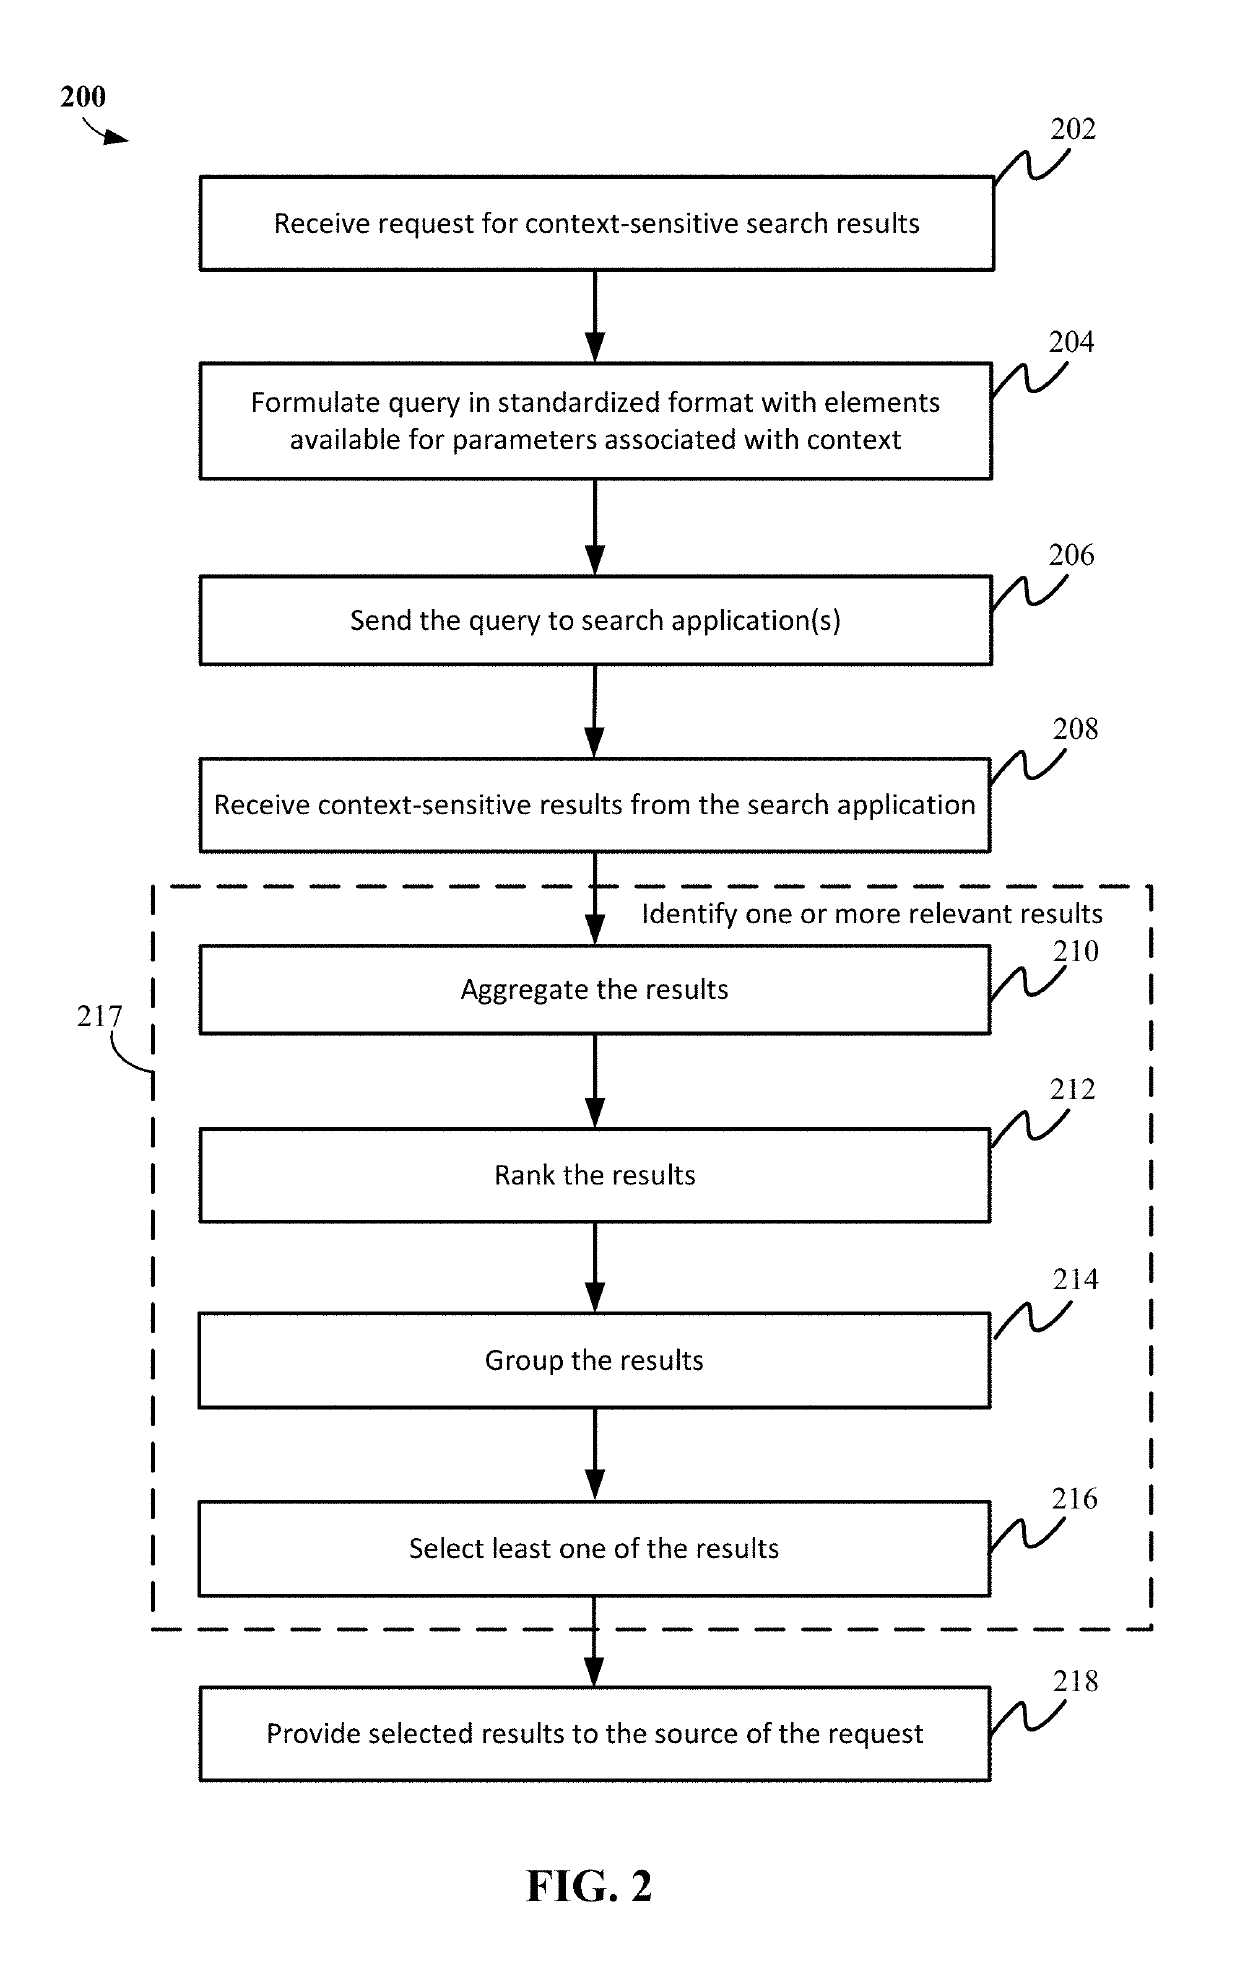 Context-sensitive methods of surfacing comprehensive knowledge in and between applications